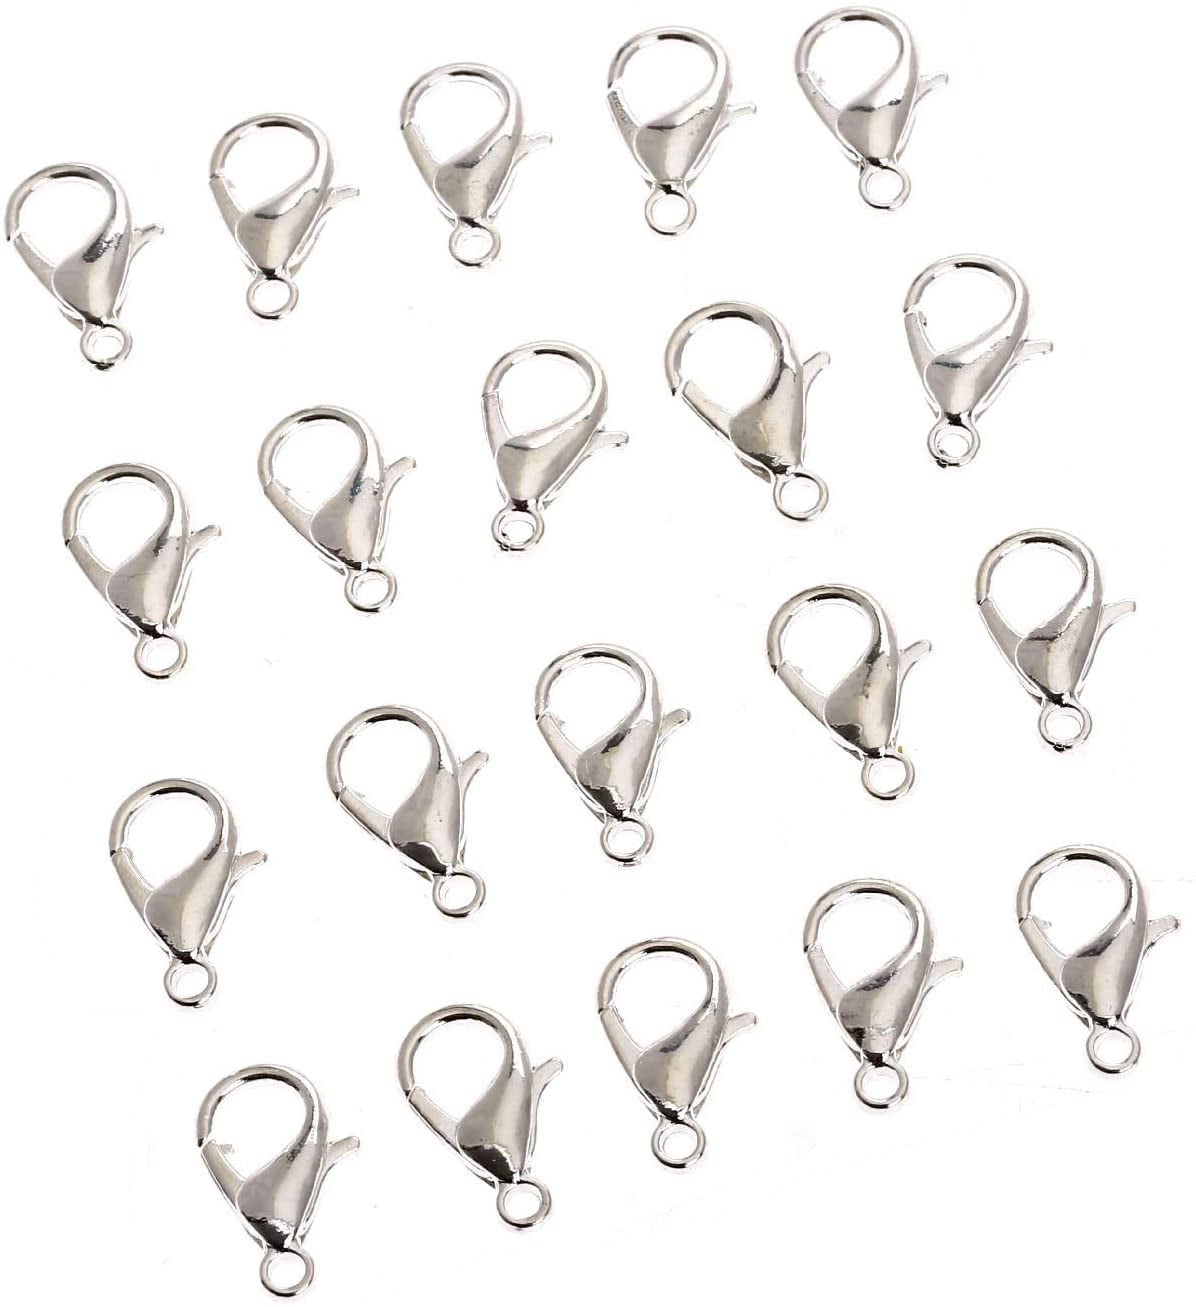 50/100Pcs Silver/Gold/Bronze Lobster Claw Clasps Hooks Finding DIY 10/12/14/16mm